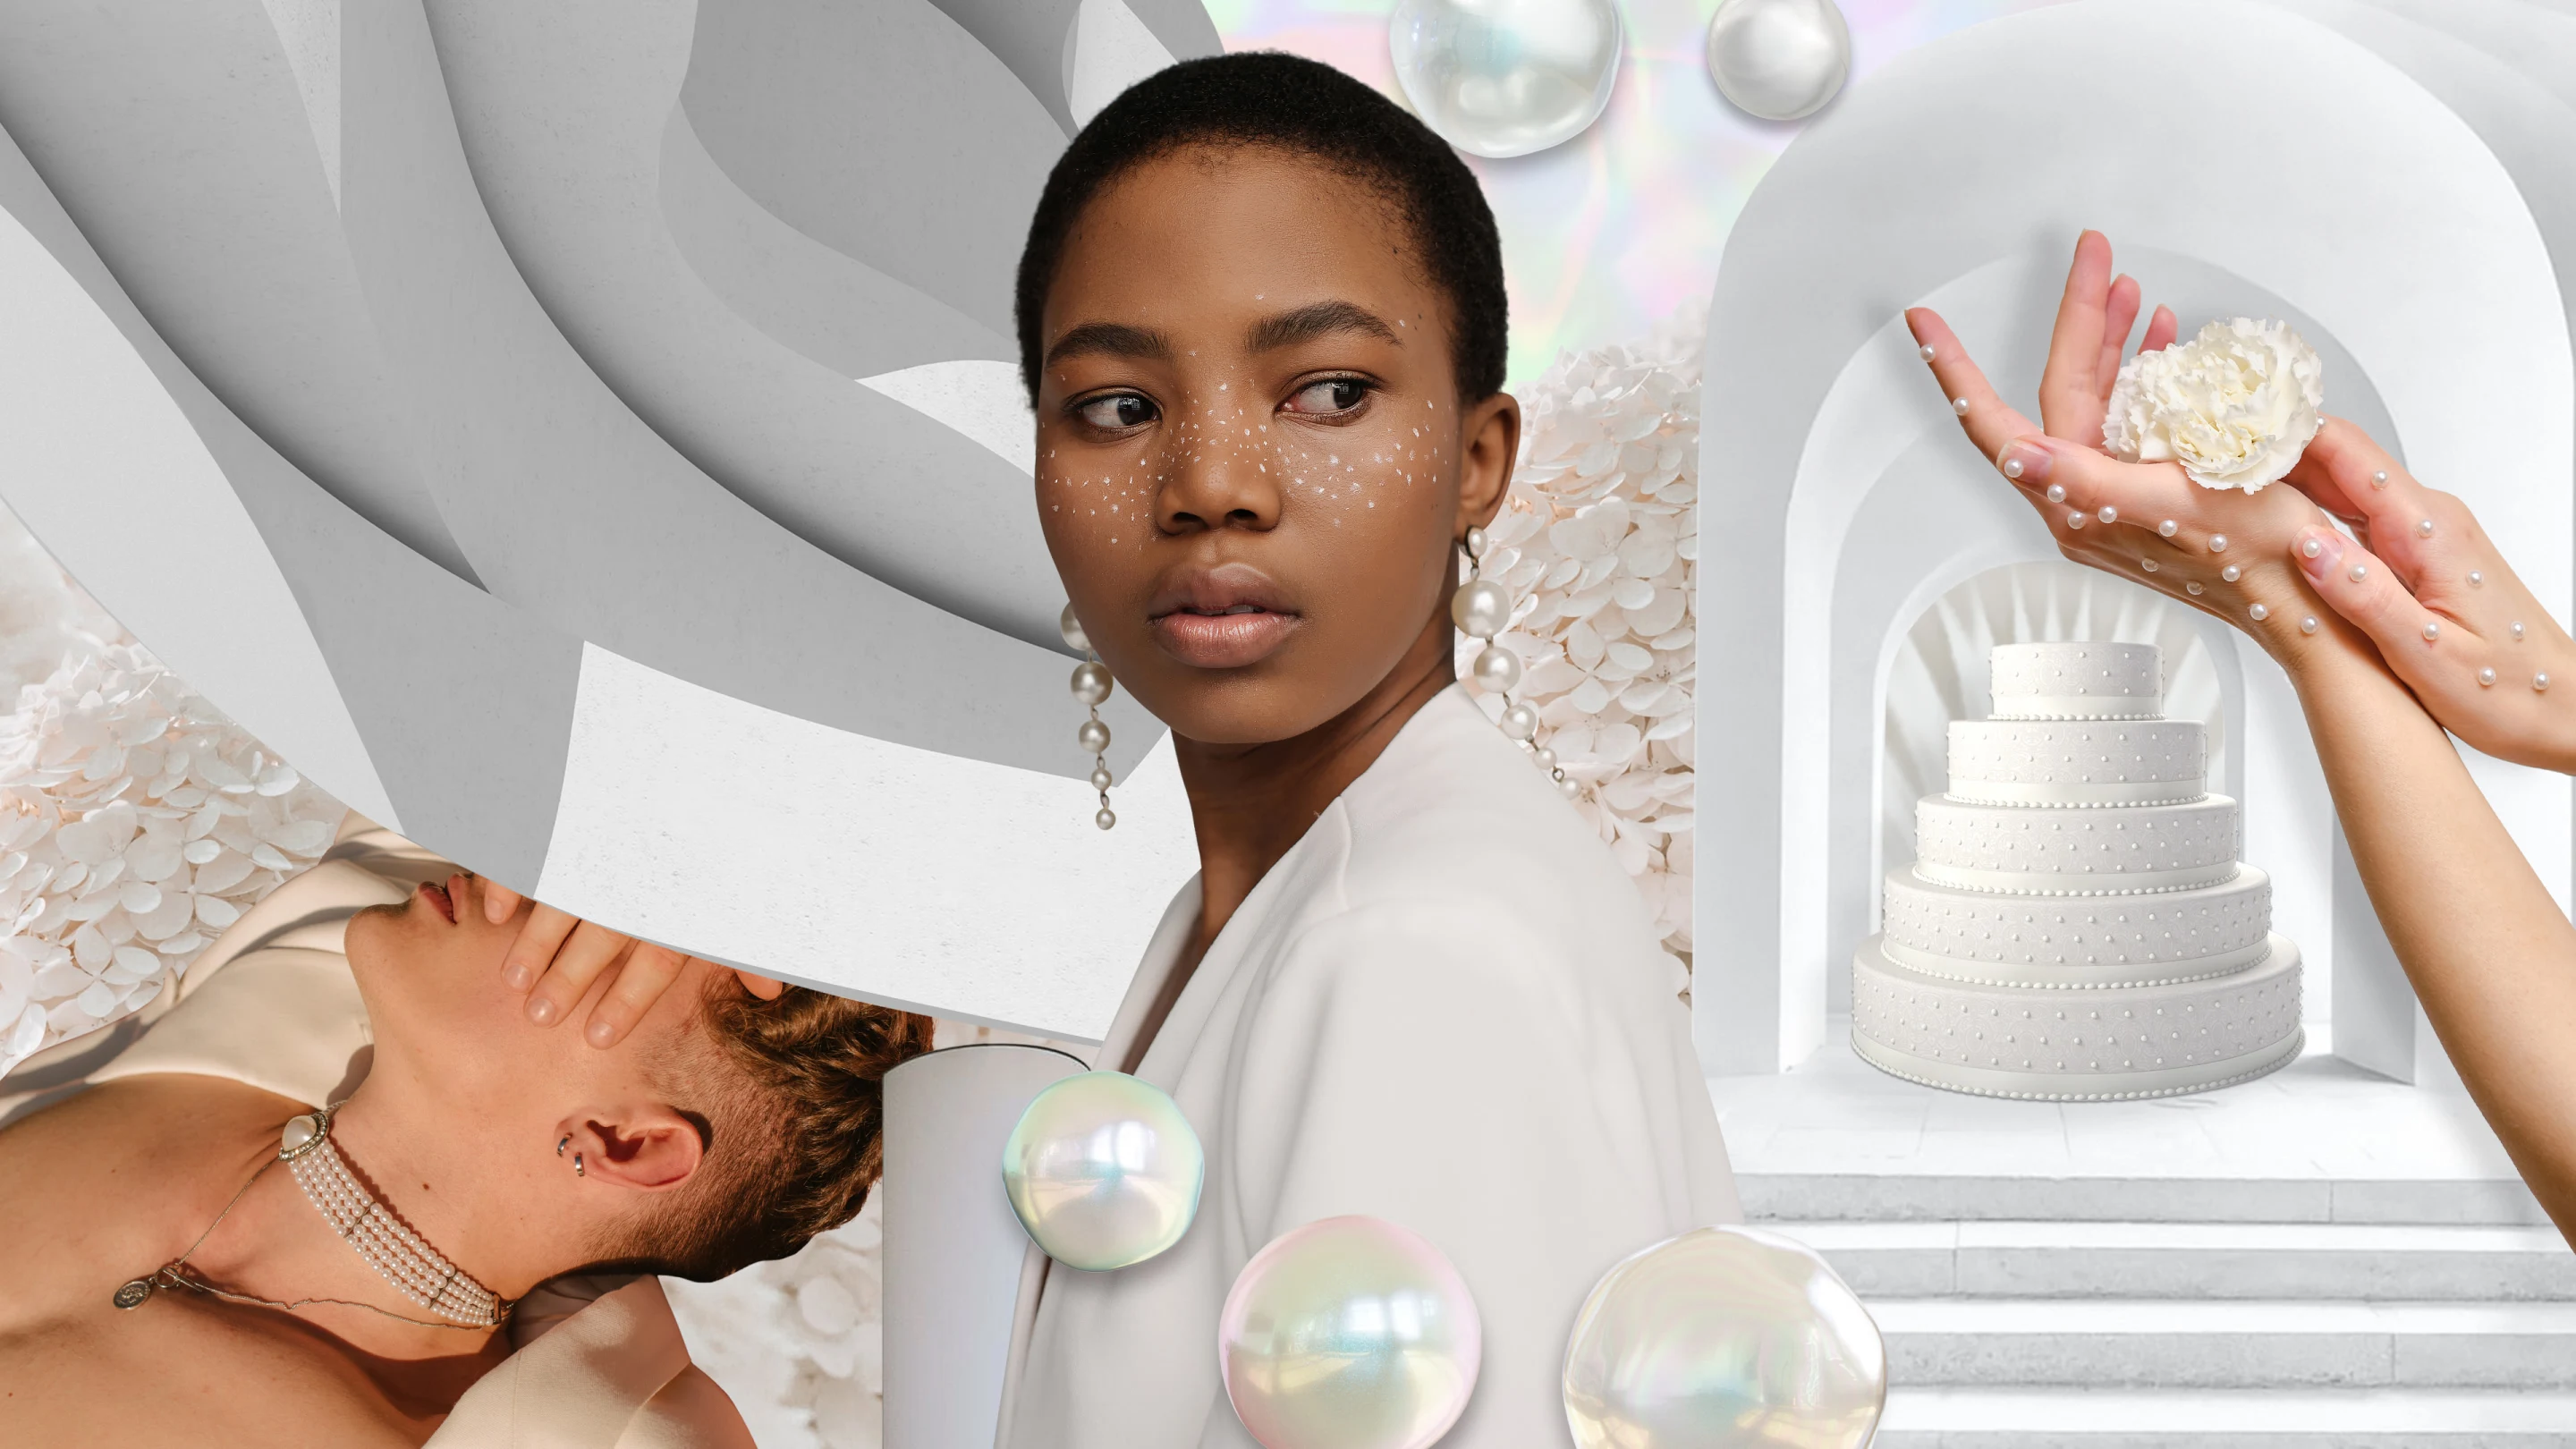 Collage of different people and pearly items. A white man is wearing a pearl choker necklace on the left. A Black woman, wearing shimmery make-up and pearl earrings, is in the centre. A wedding cake with pearl detail is under a pair of hands covered in pearls and holding a white carnation.